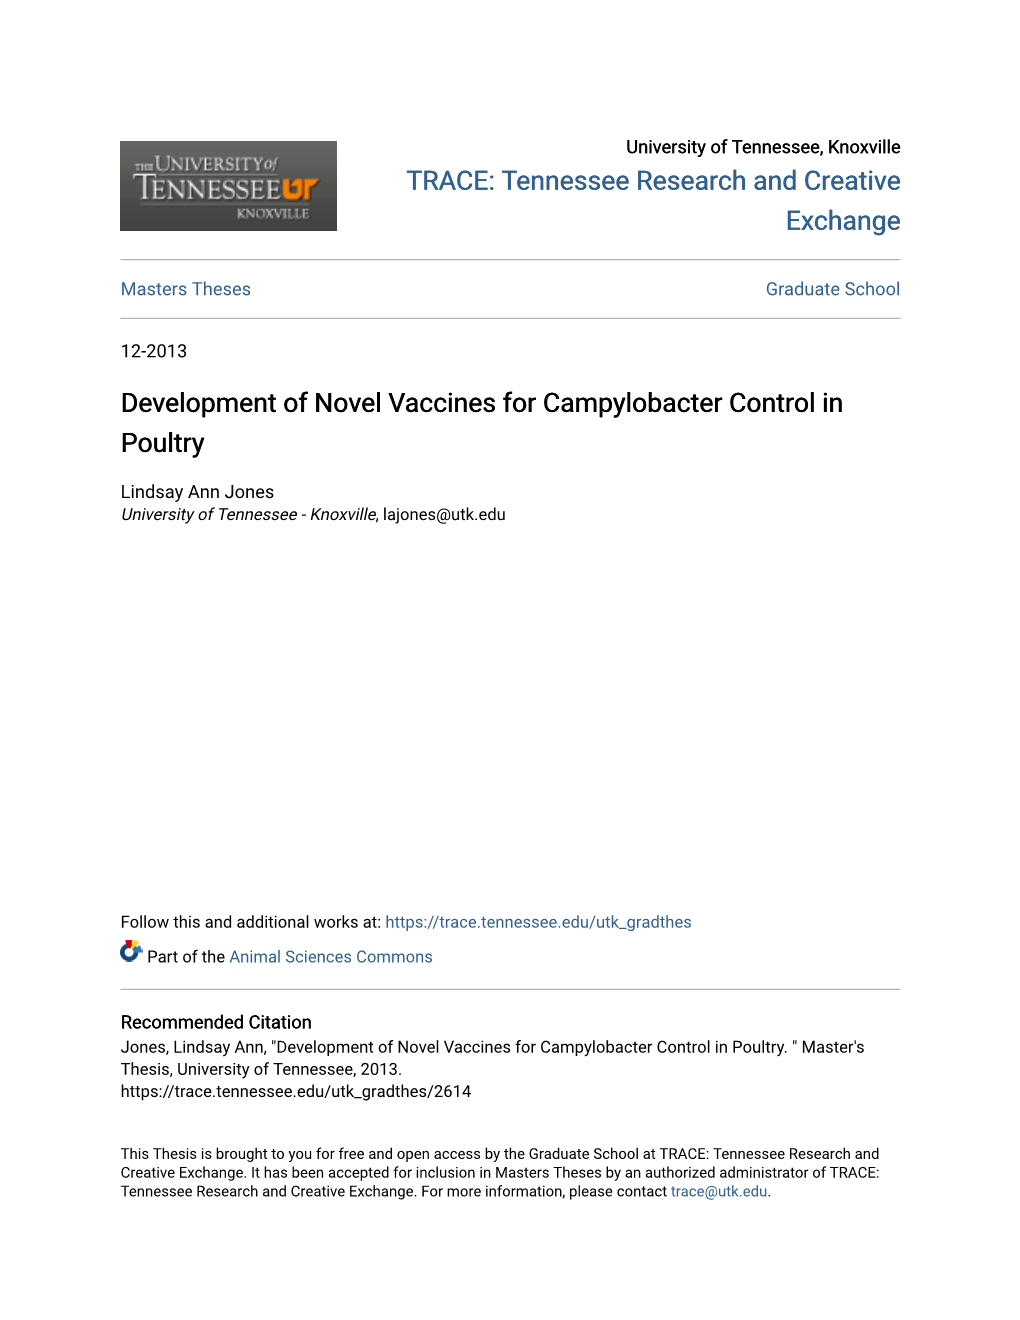 Development of Novel Vaccines for Campylobacter Control in Poultry